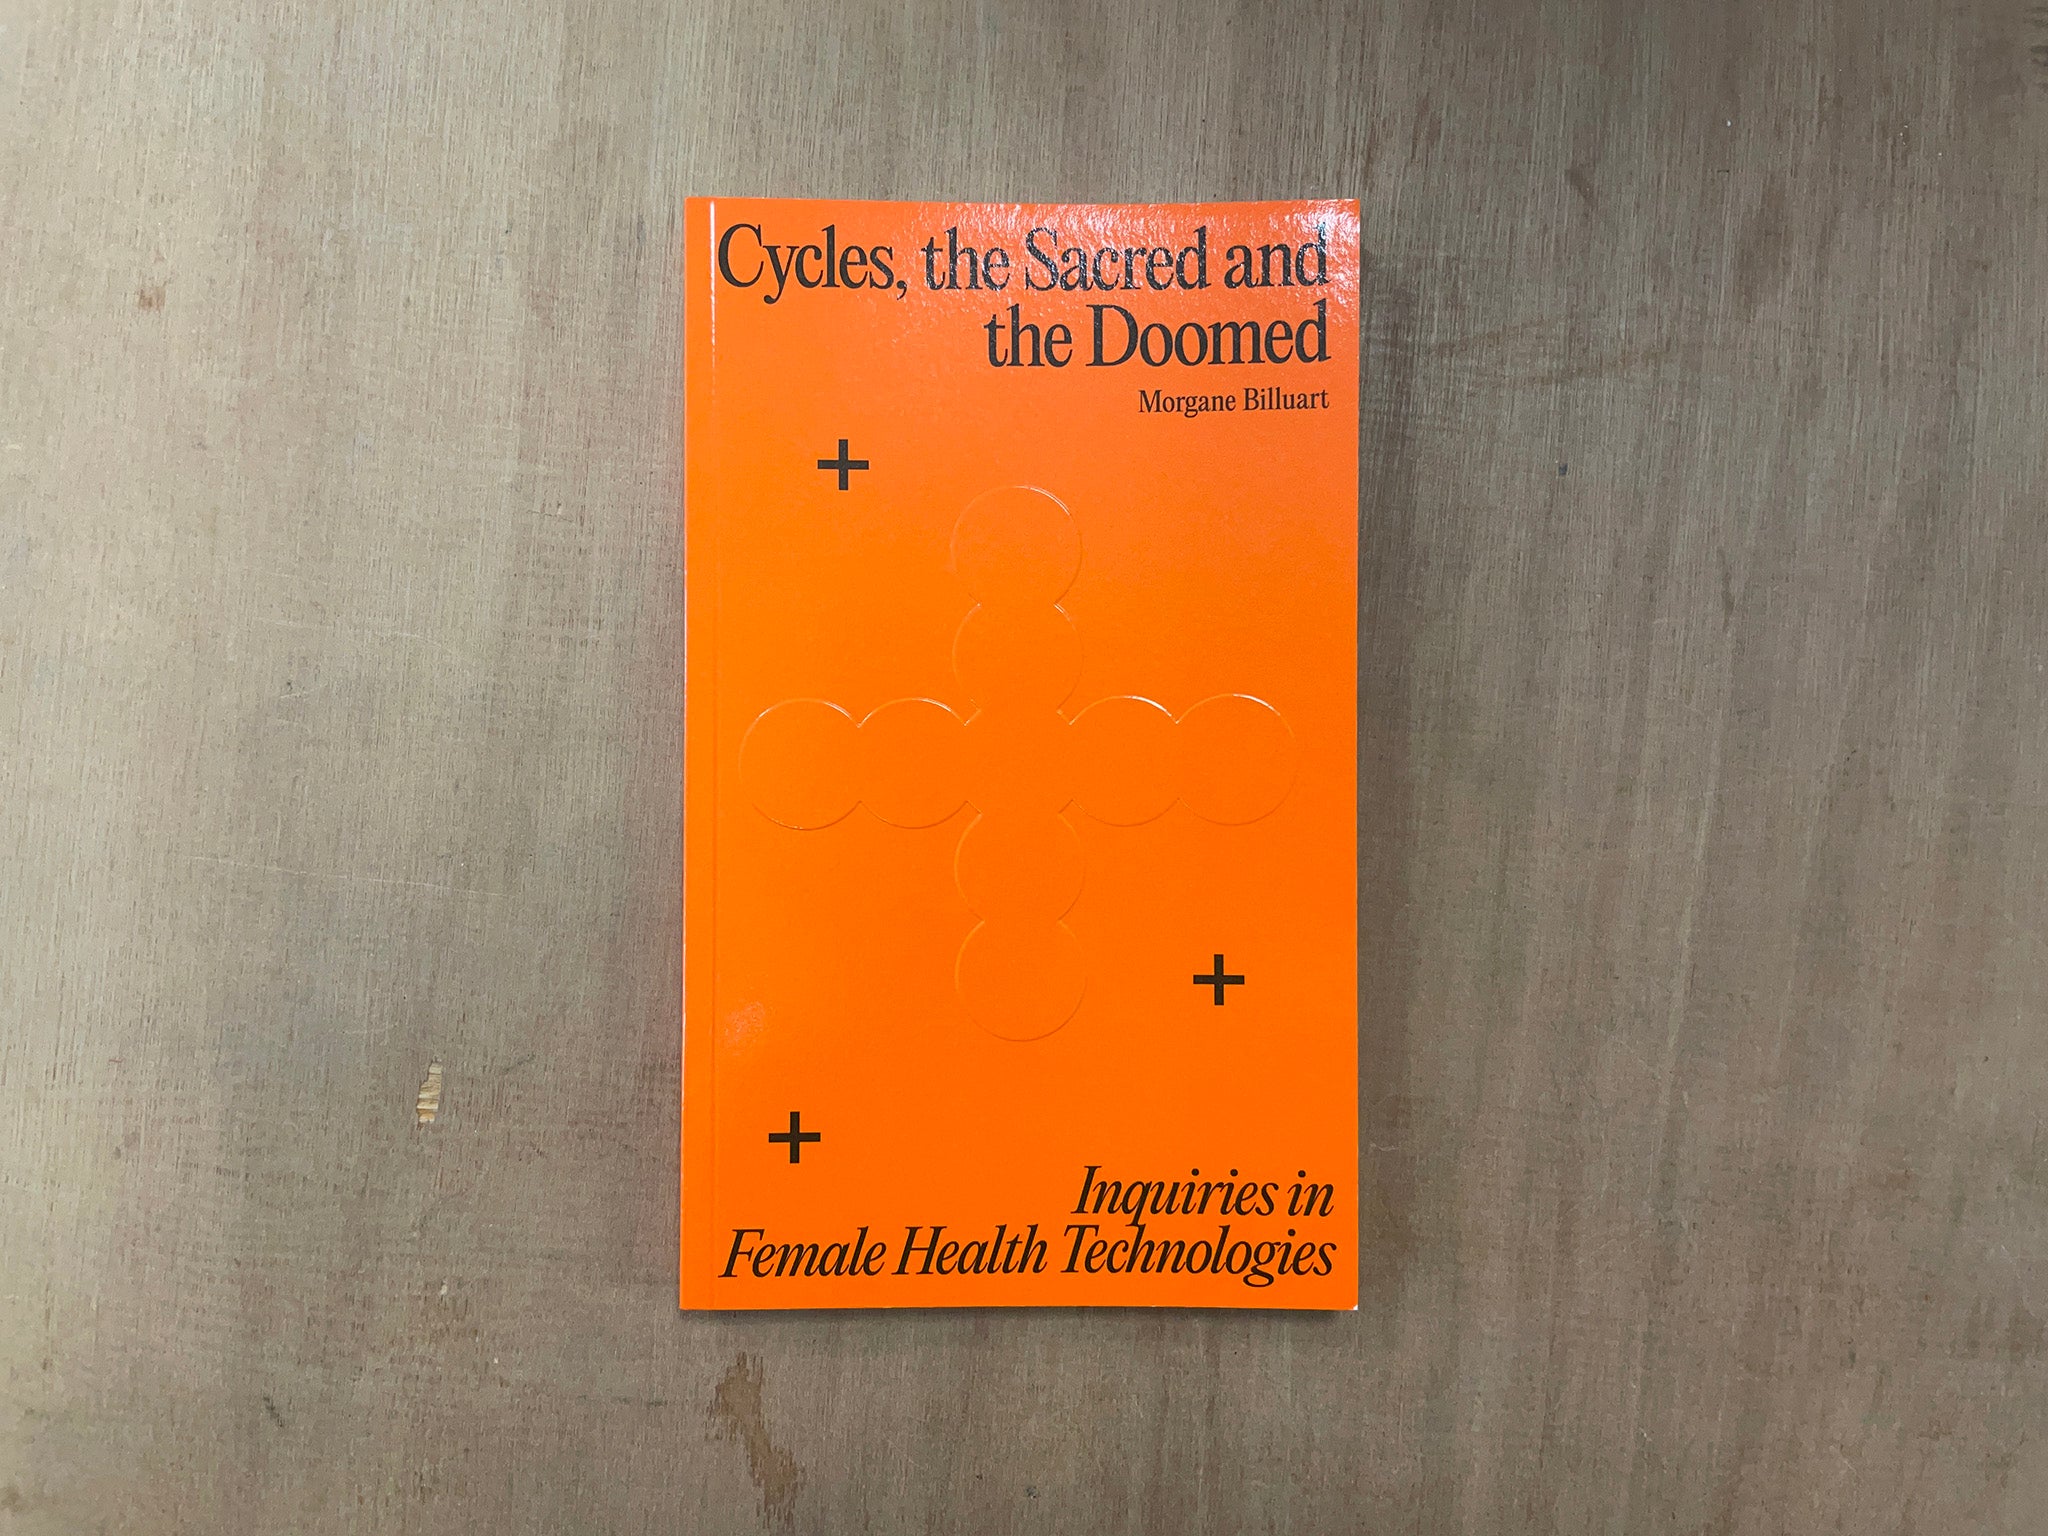 CYCLES, THE SACRED AND THE DOOMED: INQUIRIES IN FEMALE HEALTH TECHNOLOGIES by Morgane Billuart